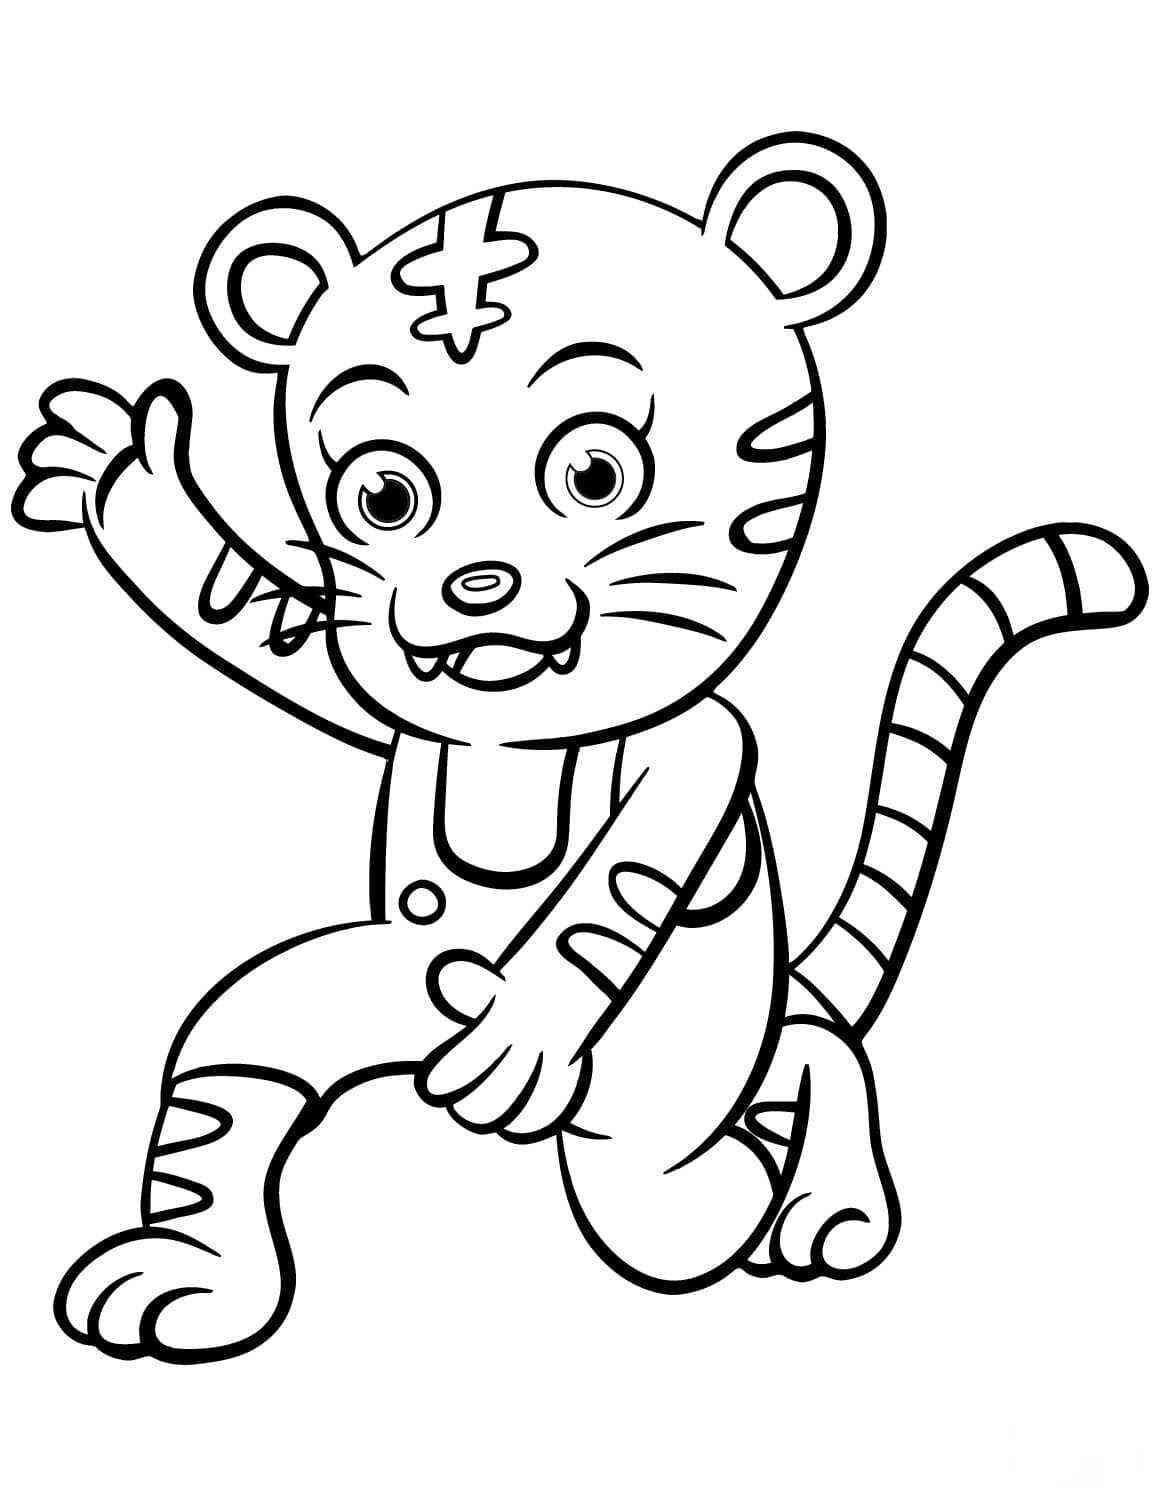 Daniel tiger wears overall Coloring Pages